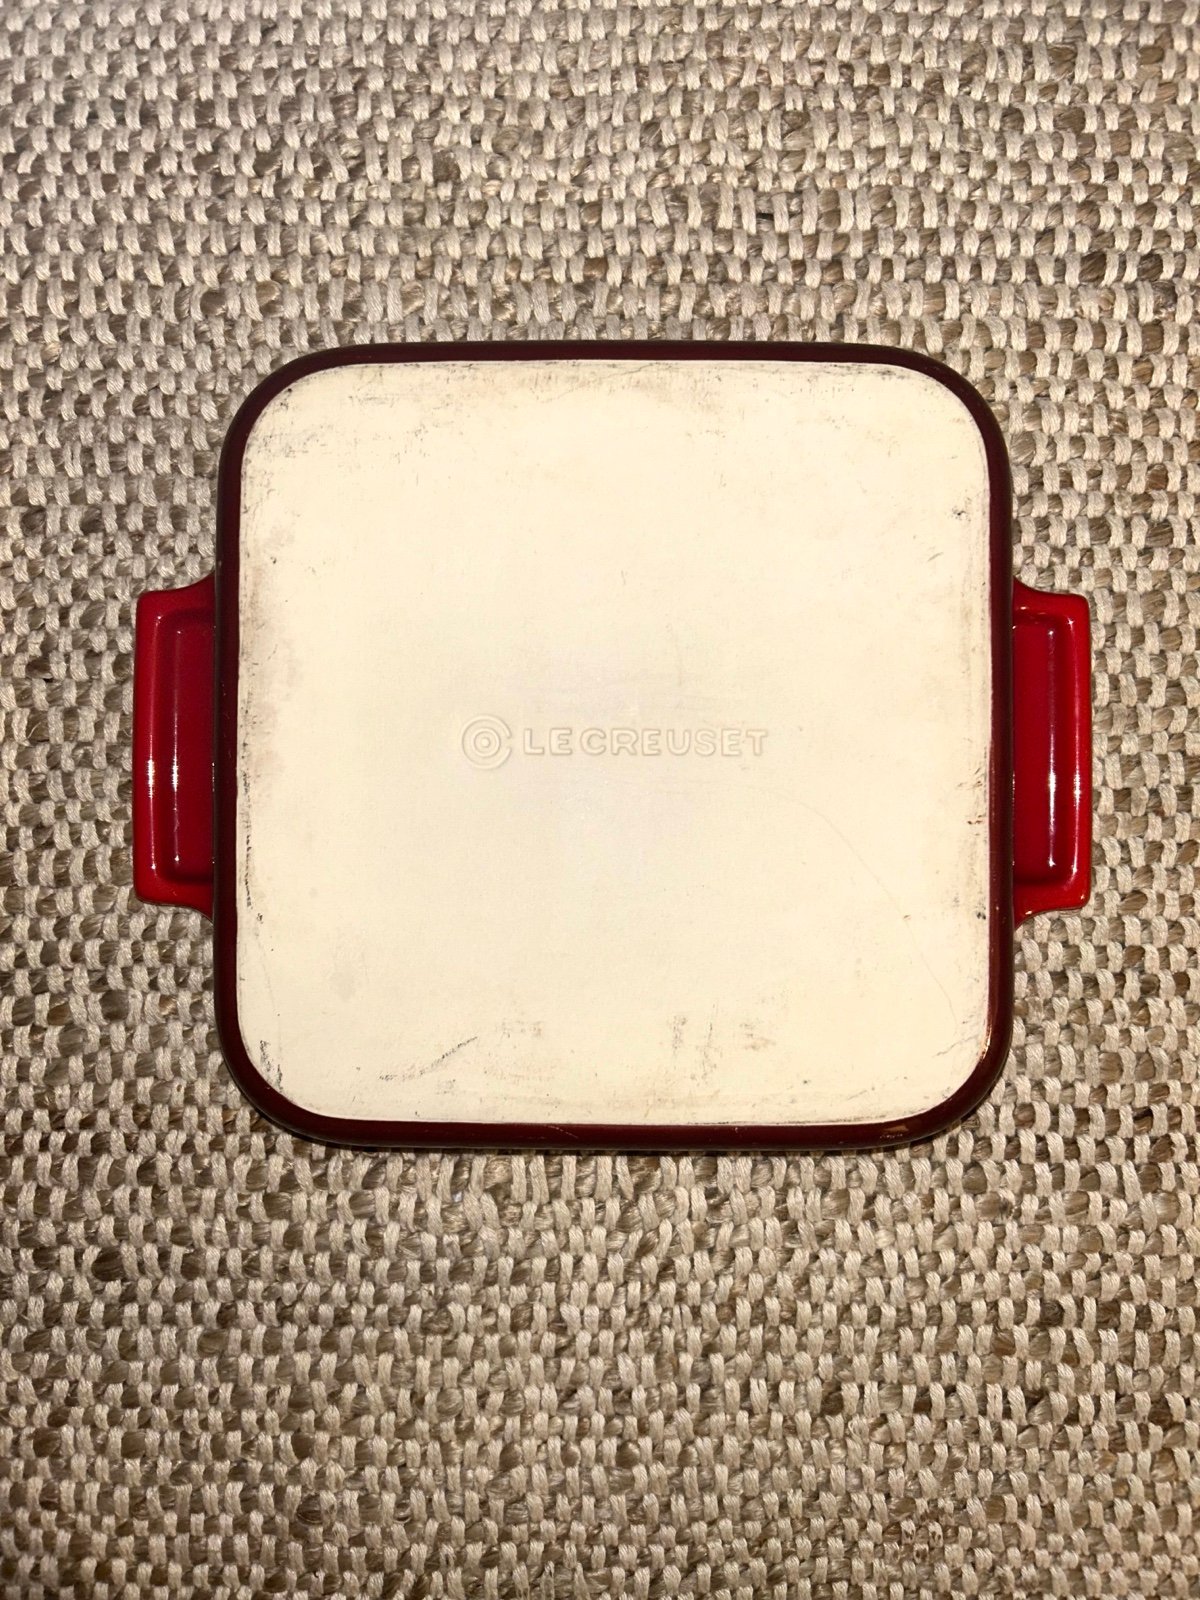 Red Le Creuset Stoneware Square Baking Dish with Handle